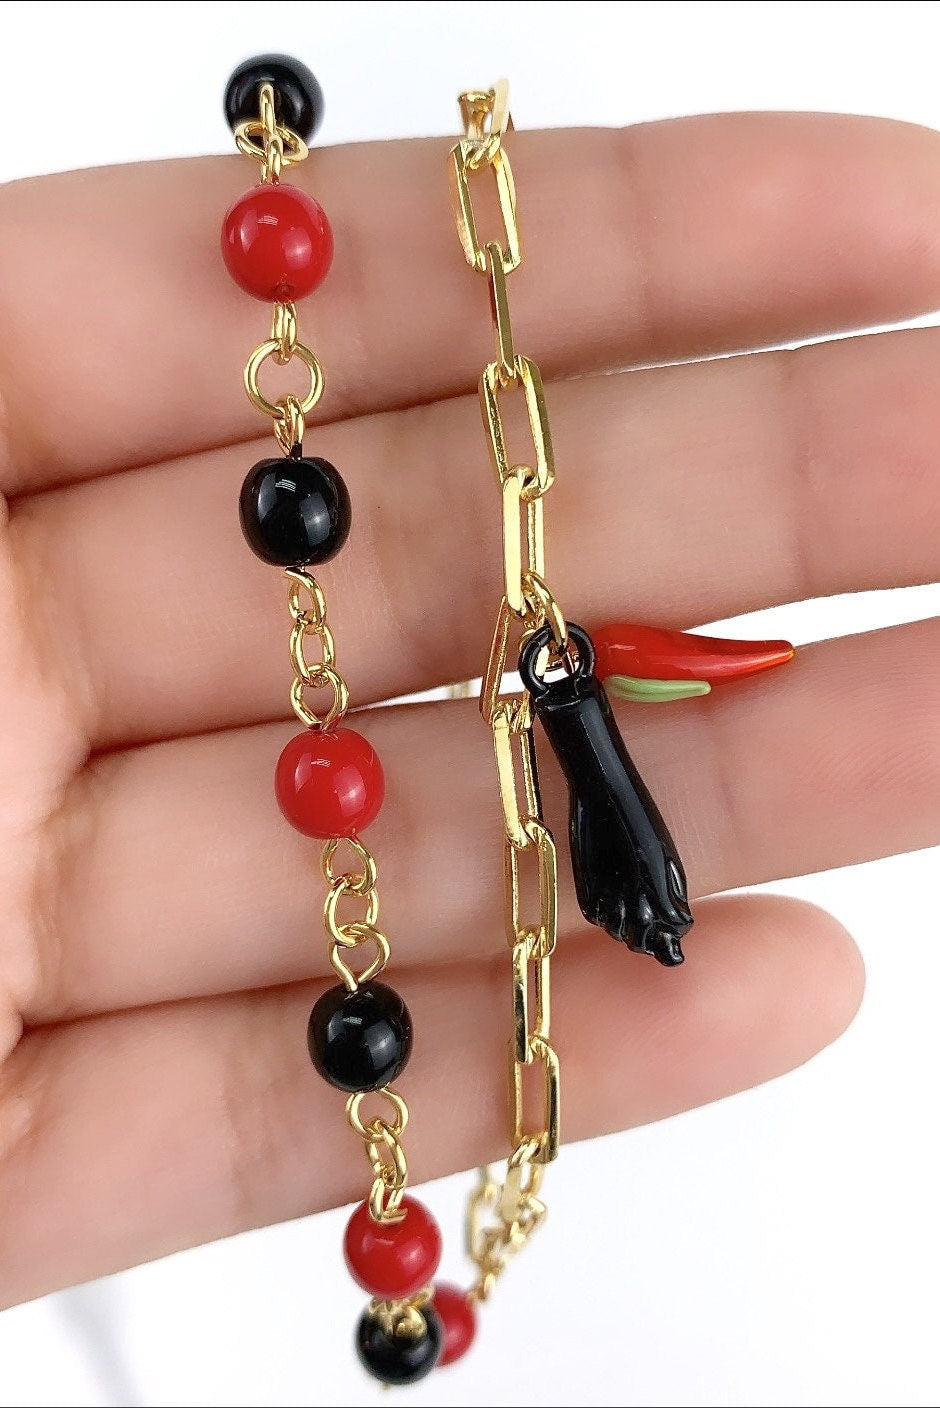 18k Gold Filled Paper Clip Link and Black & Red Beads, Double Chain, Figa Hand Chili Charm Bracelet, Wholesale and Jewelry Supplies